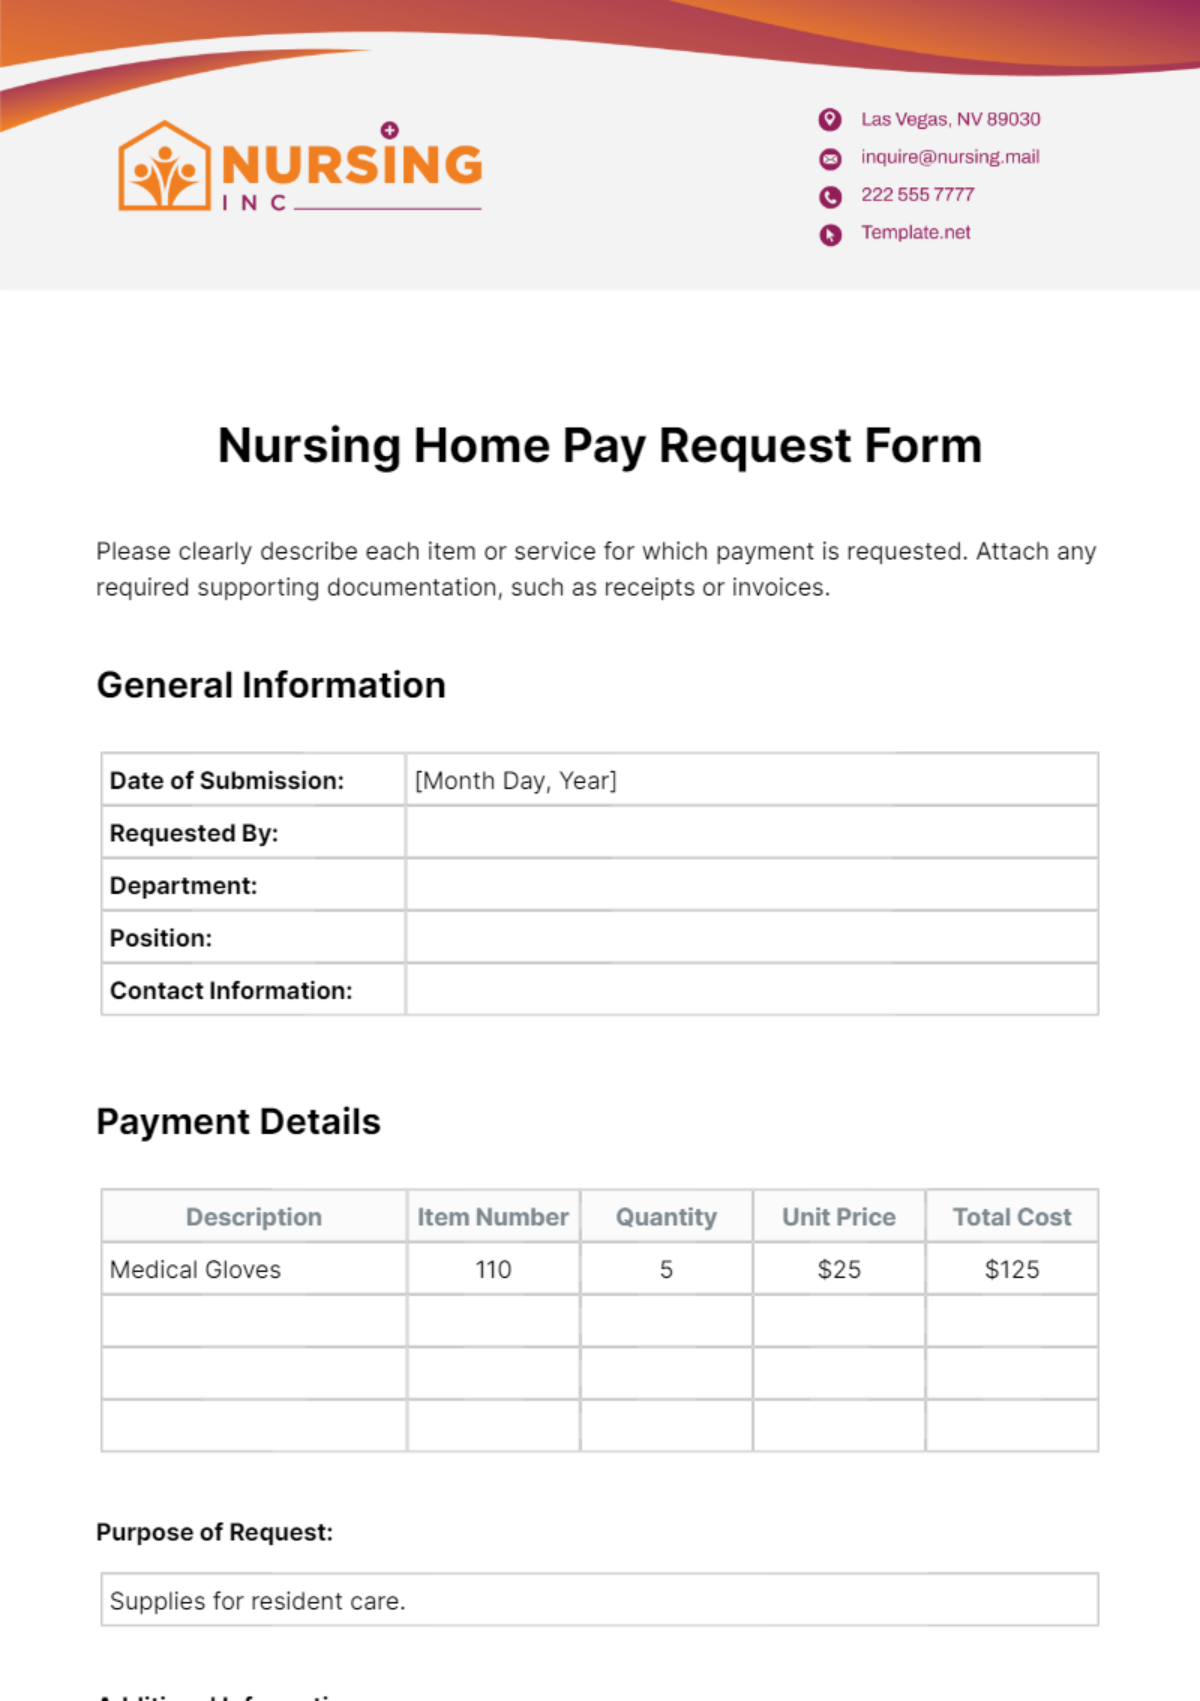 Nursing Home Pay Request Form Template